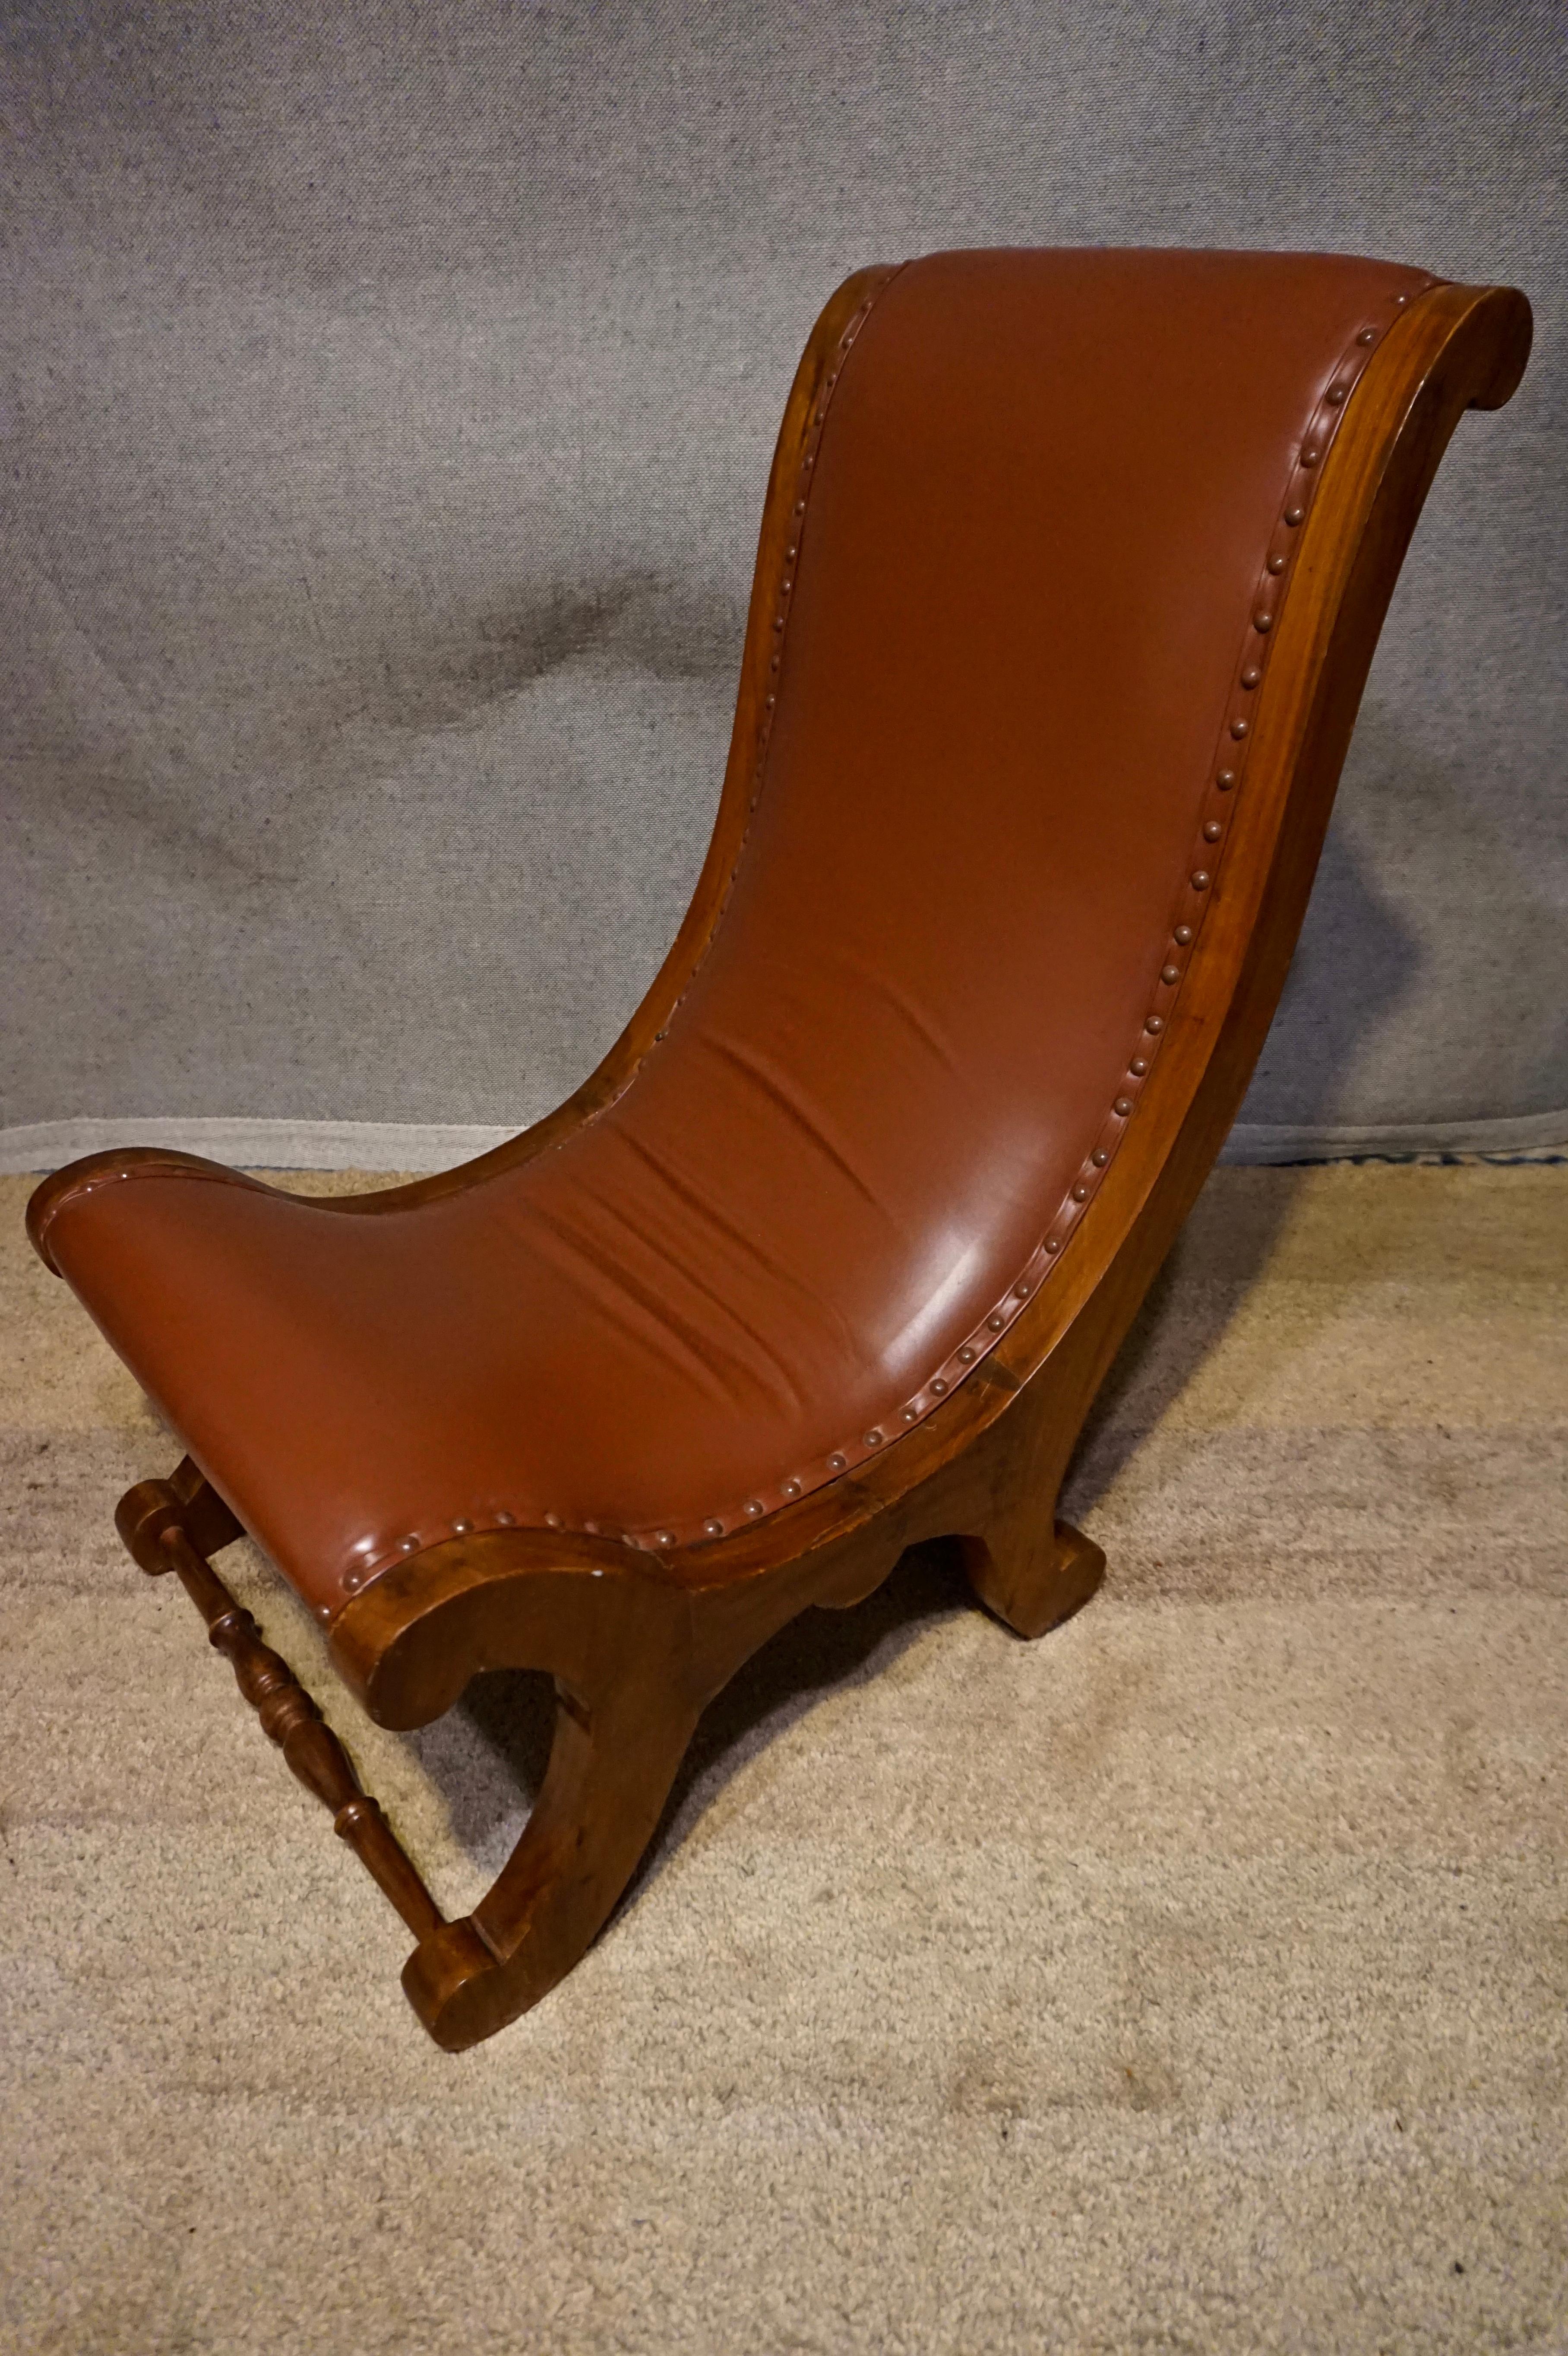 British Colonial Teak Slipper Chair With Leather Upholstery In Good Condition For Sale In Vancouver, British Columbia